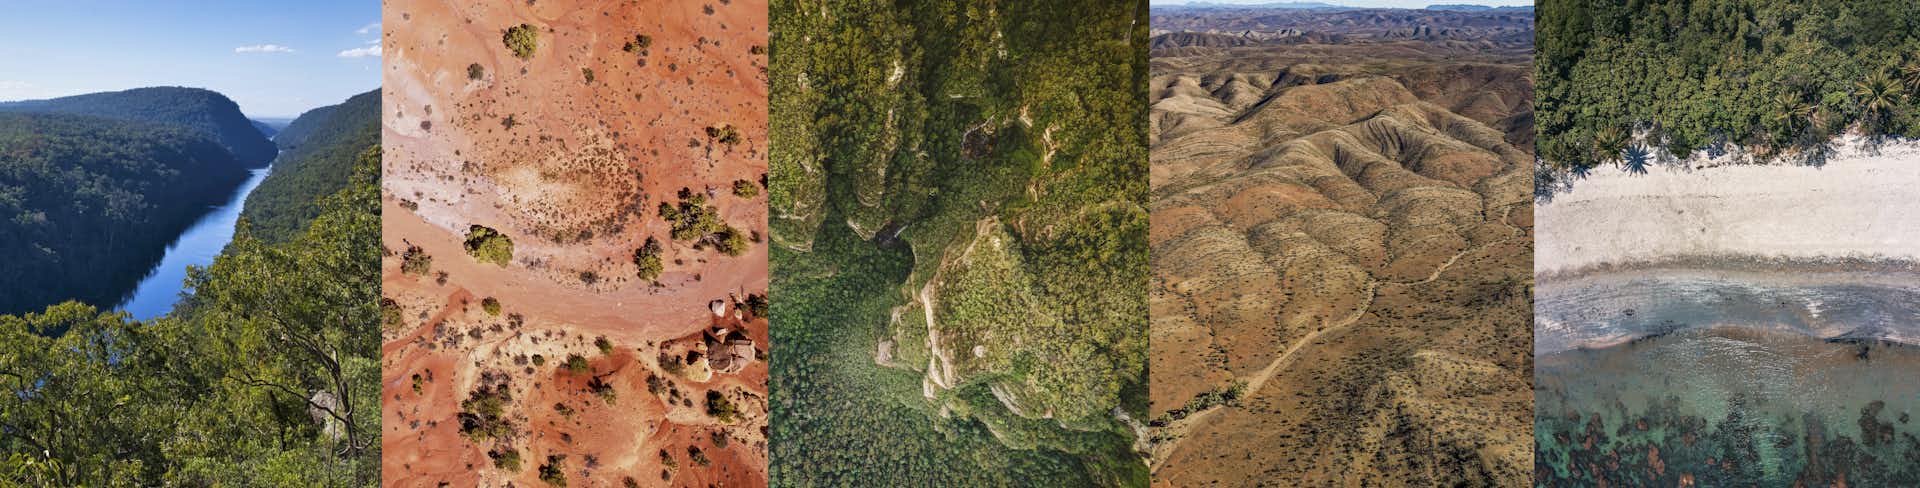 We reconstructed landscapes that greeted the first humans in Australia around 65,000 years ago